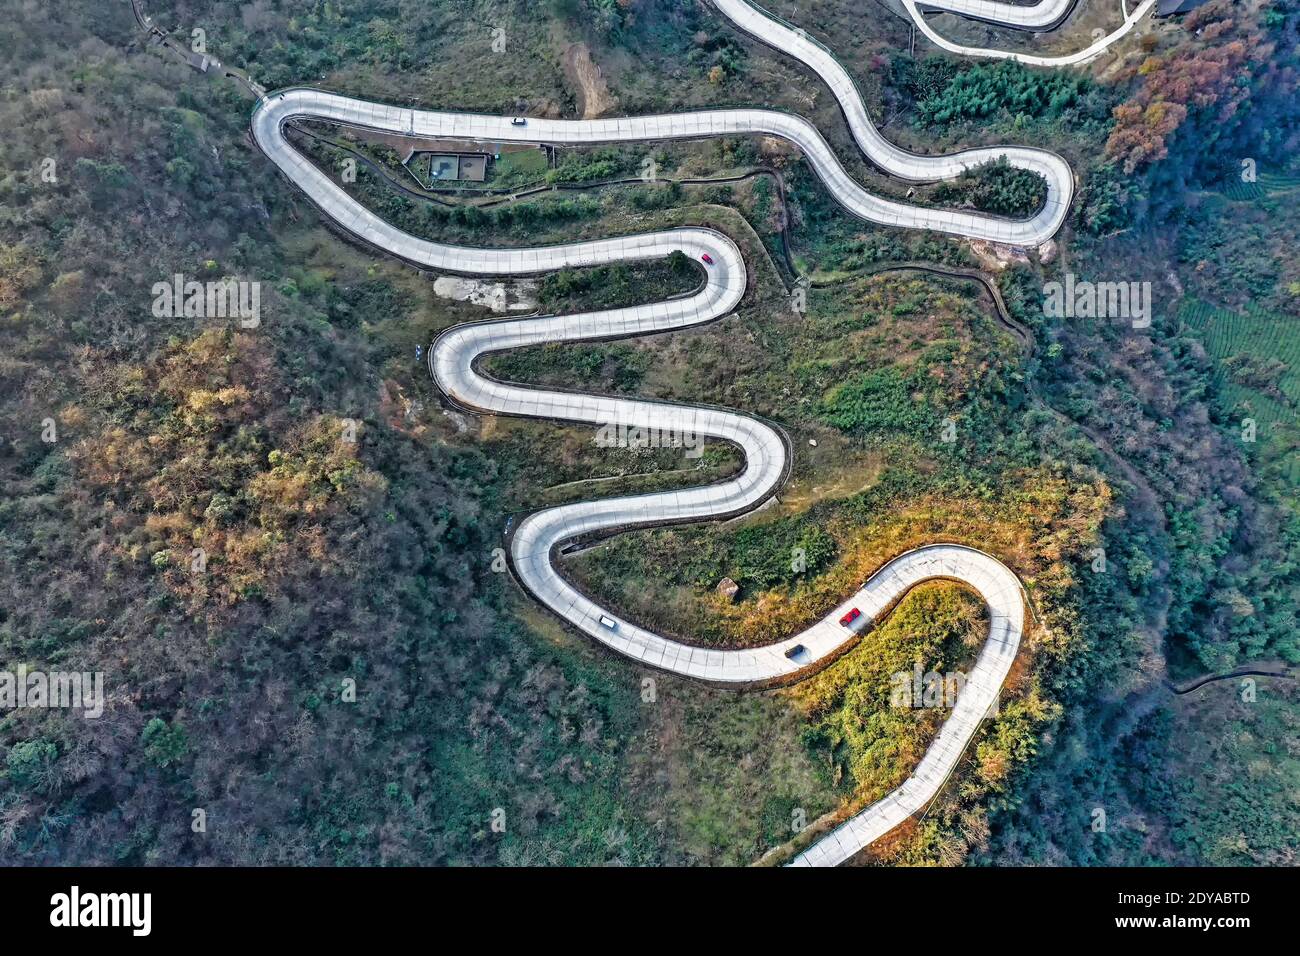 An aerial view of the winding cliff highway (Guzhang Highway) looking like a silver snake in Wangjiafan town, Yidu city, central China's Hubei provinc Stock Photo